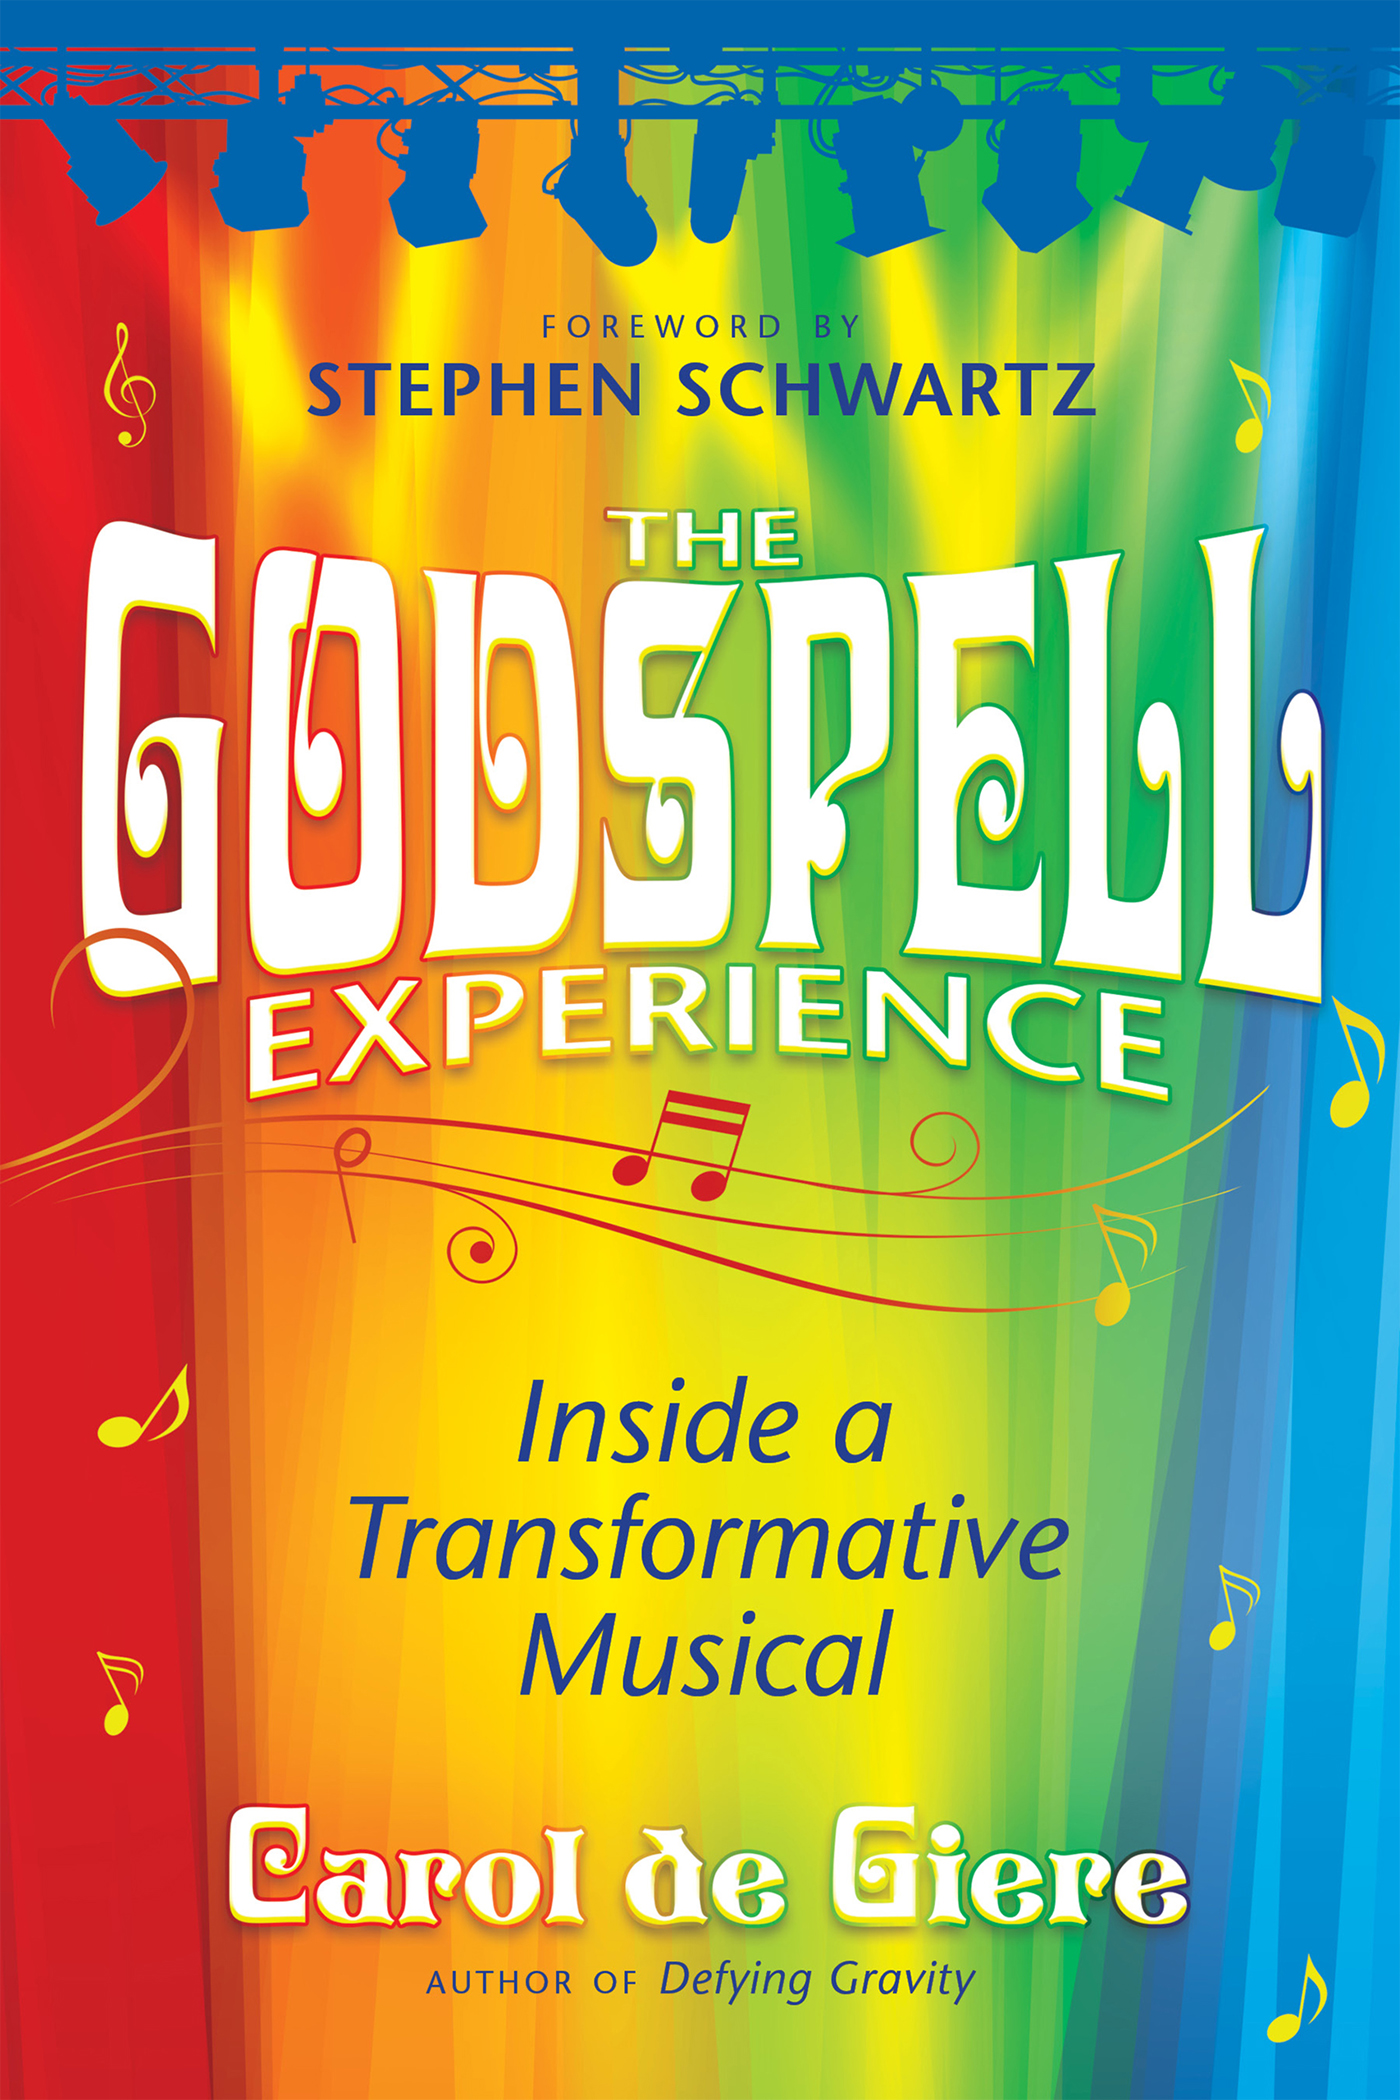 "The Godspell Experience" covers the making of "Godspell" and stories behind the songs.